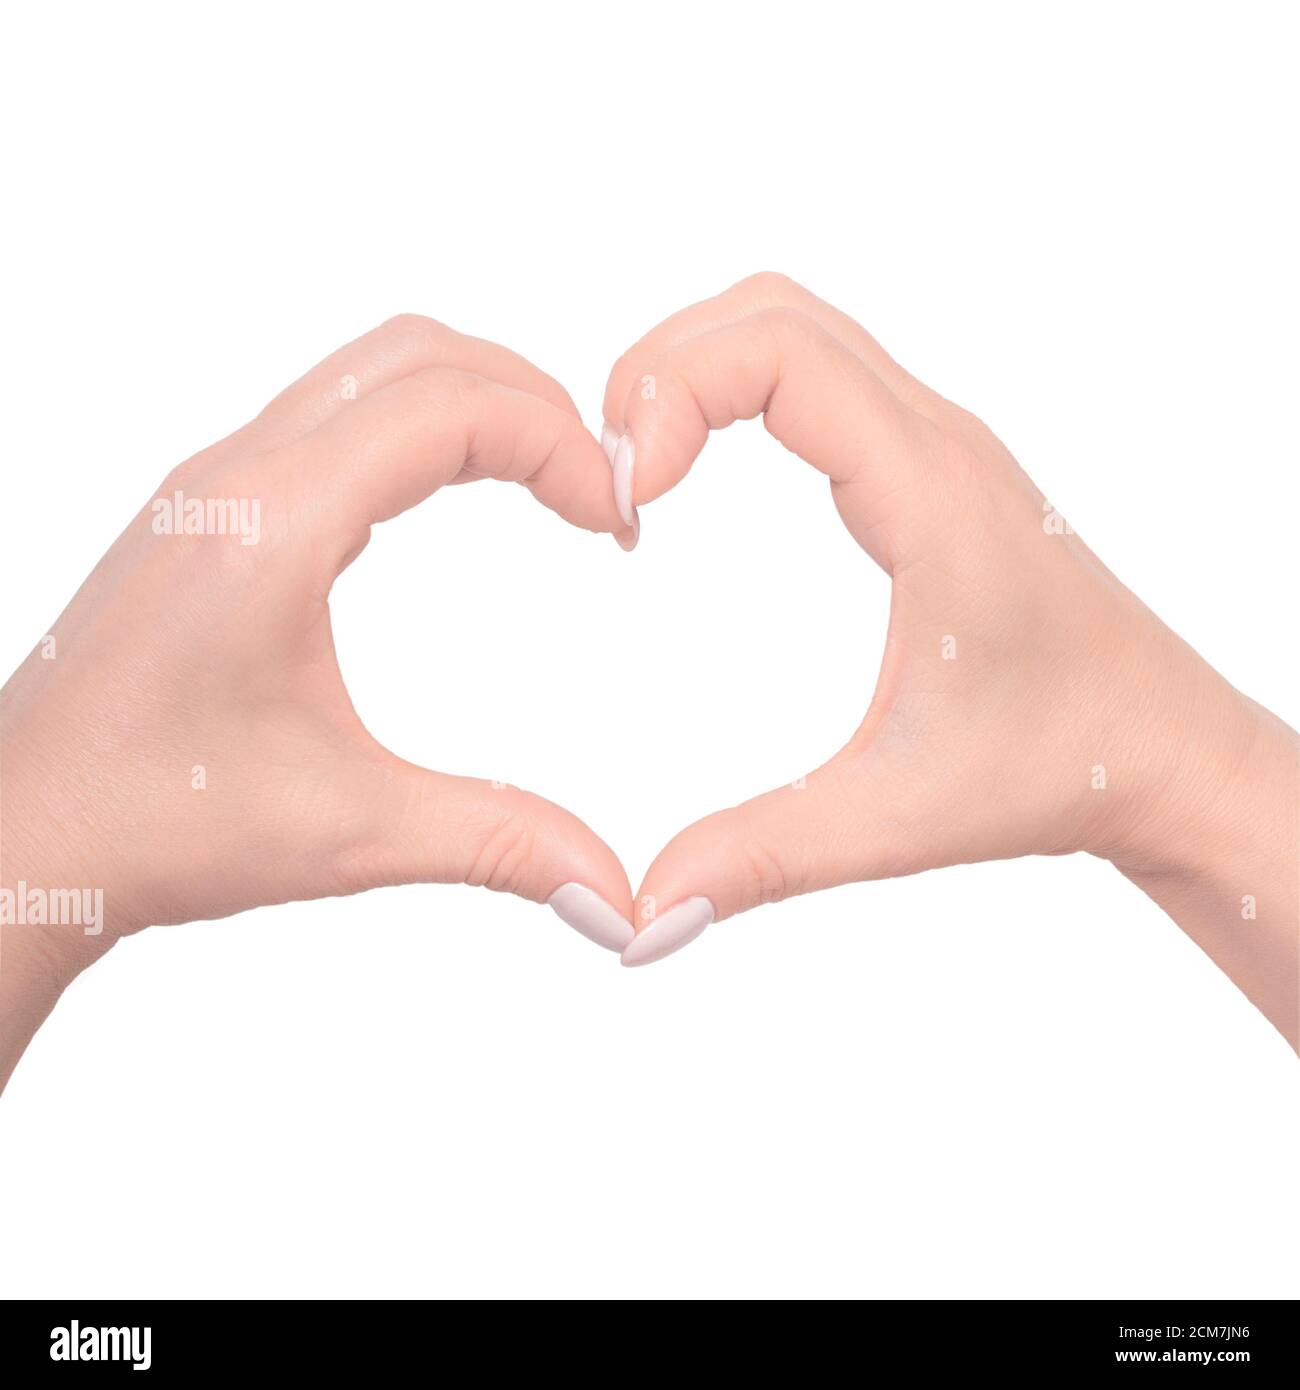 women hands folded in a heart isolated on white background Stock Photo